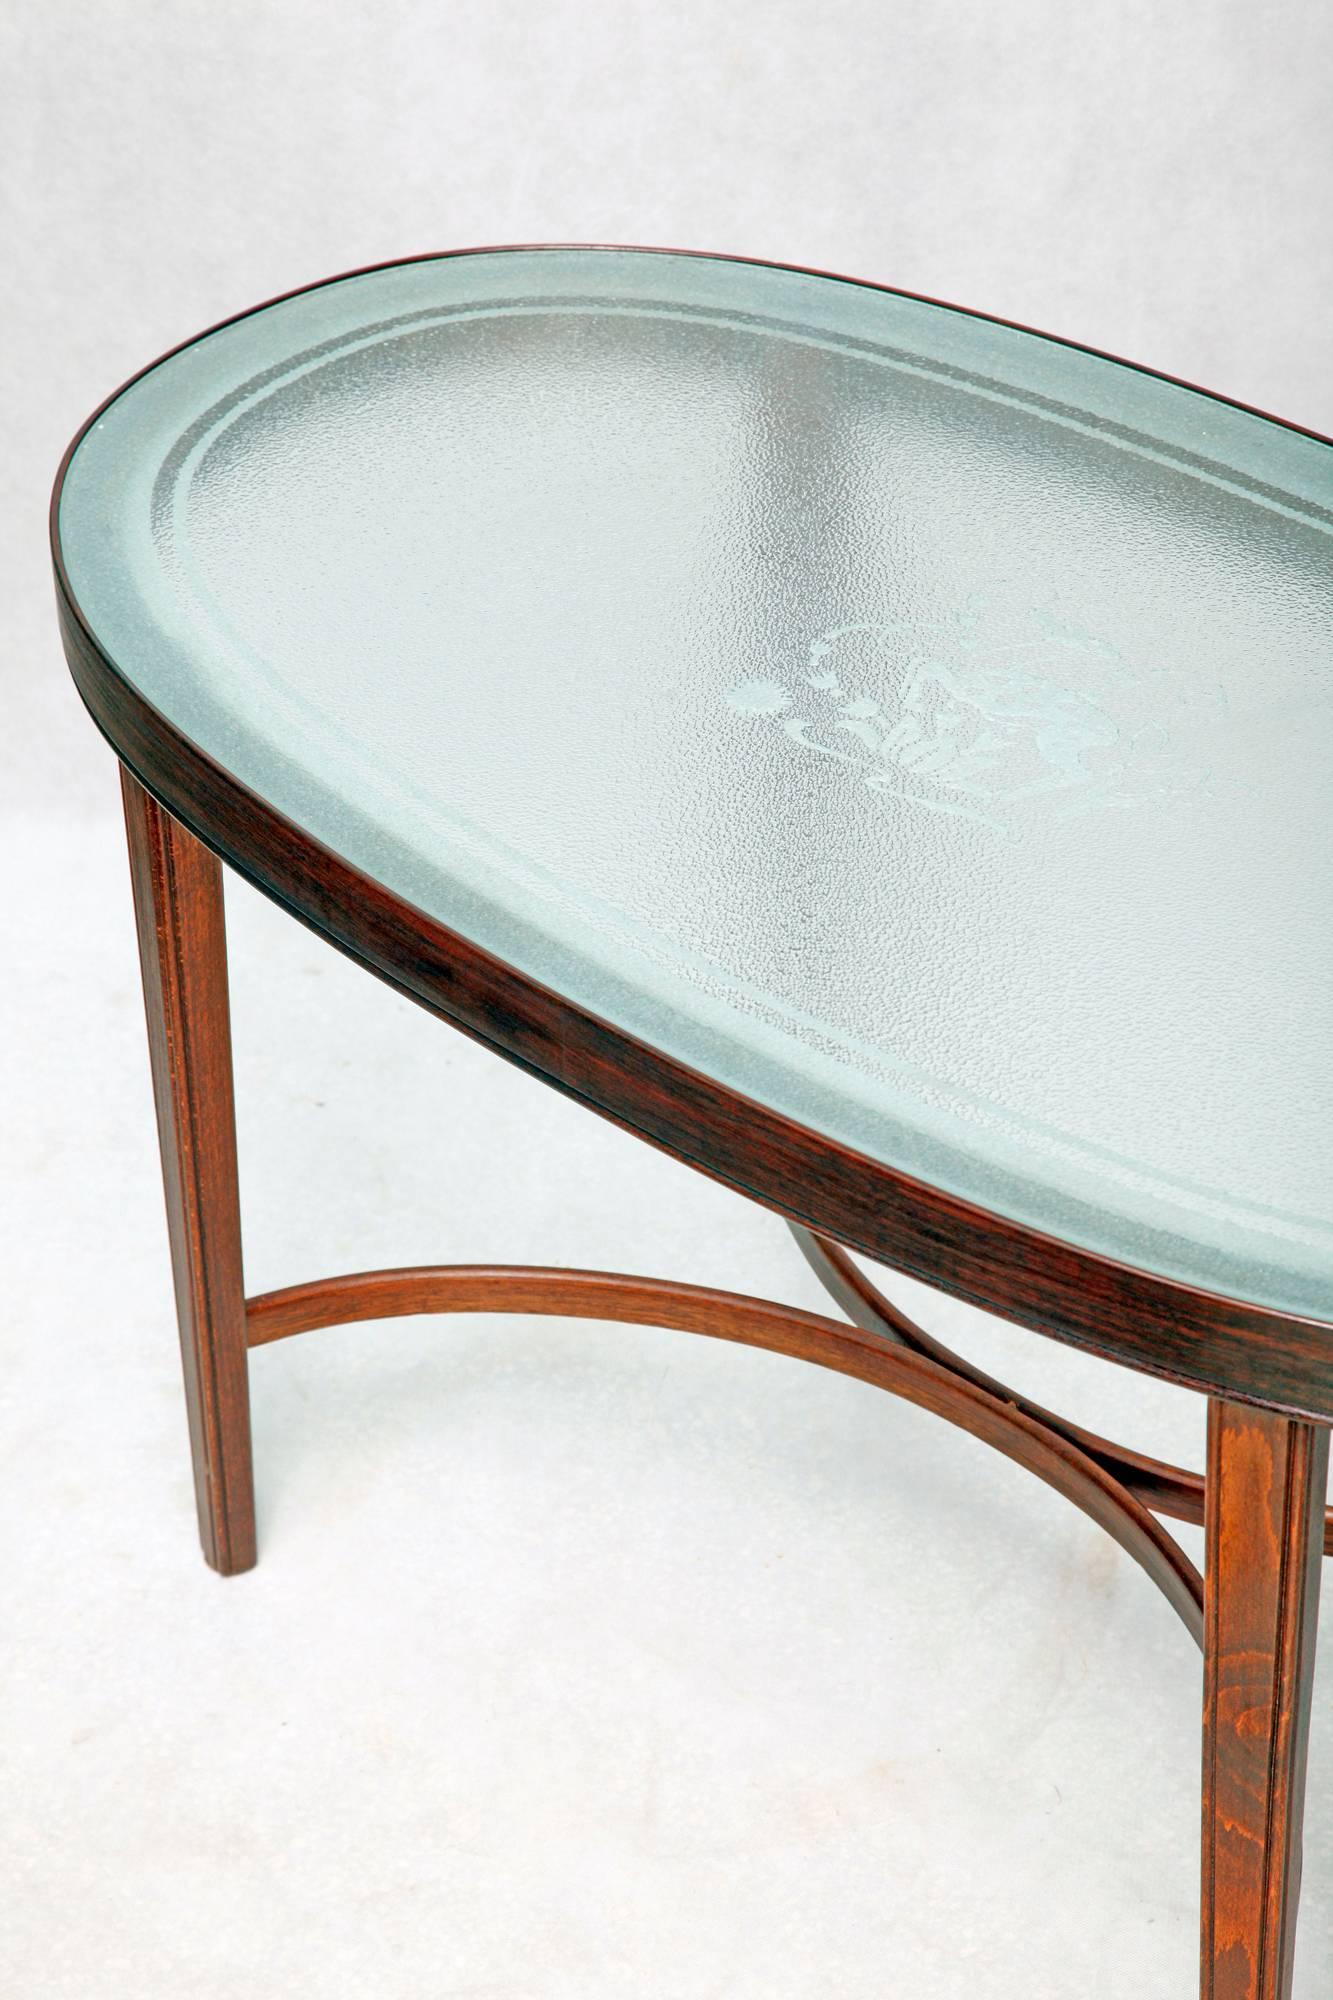 Beech Coffee Table with a Glass Top, Denmark, 1940s For Sale 2